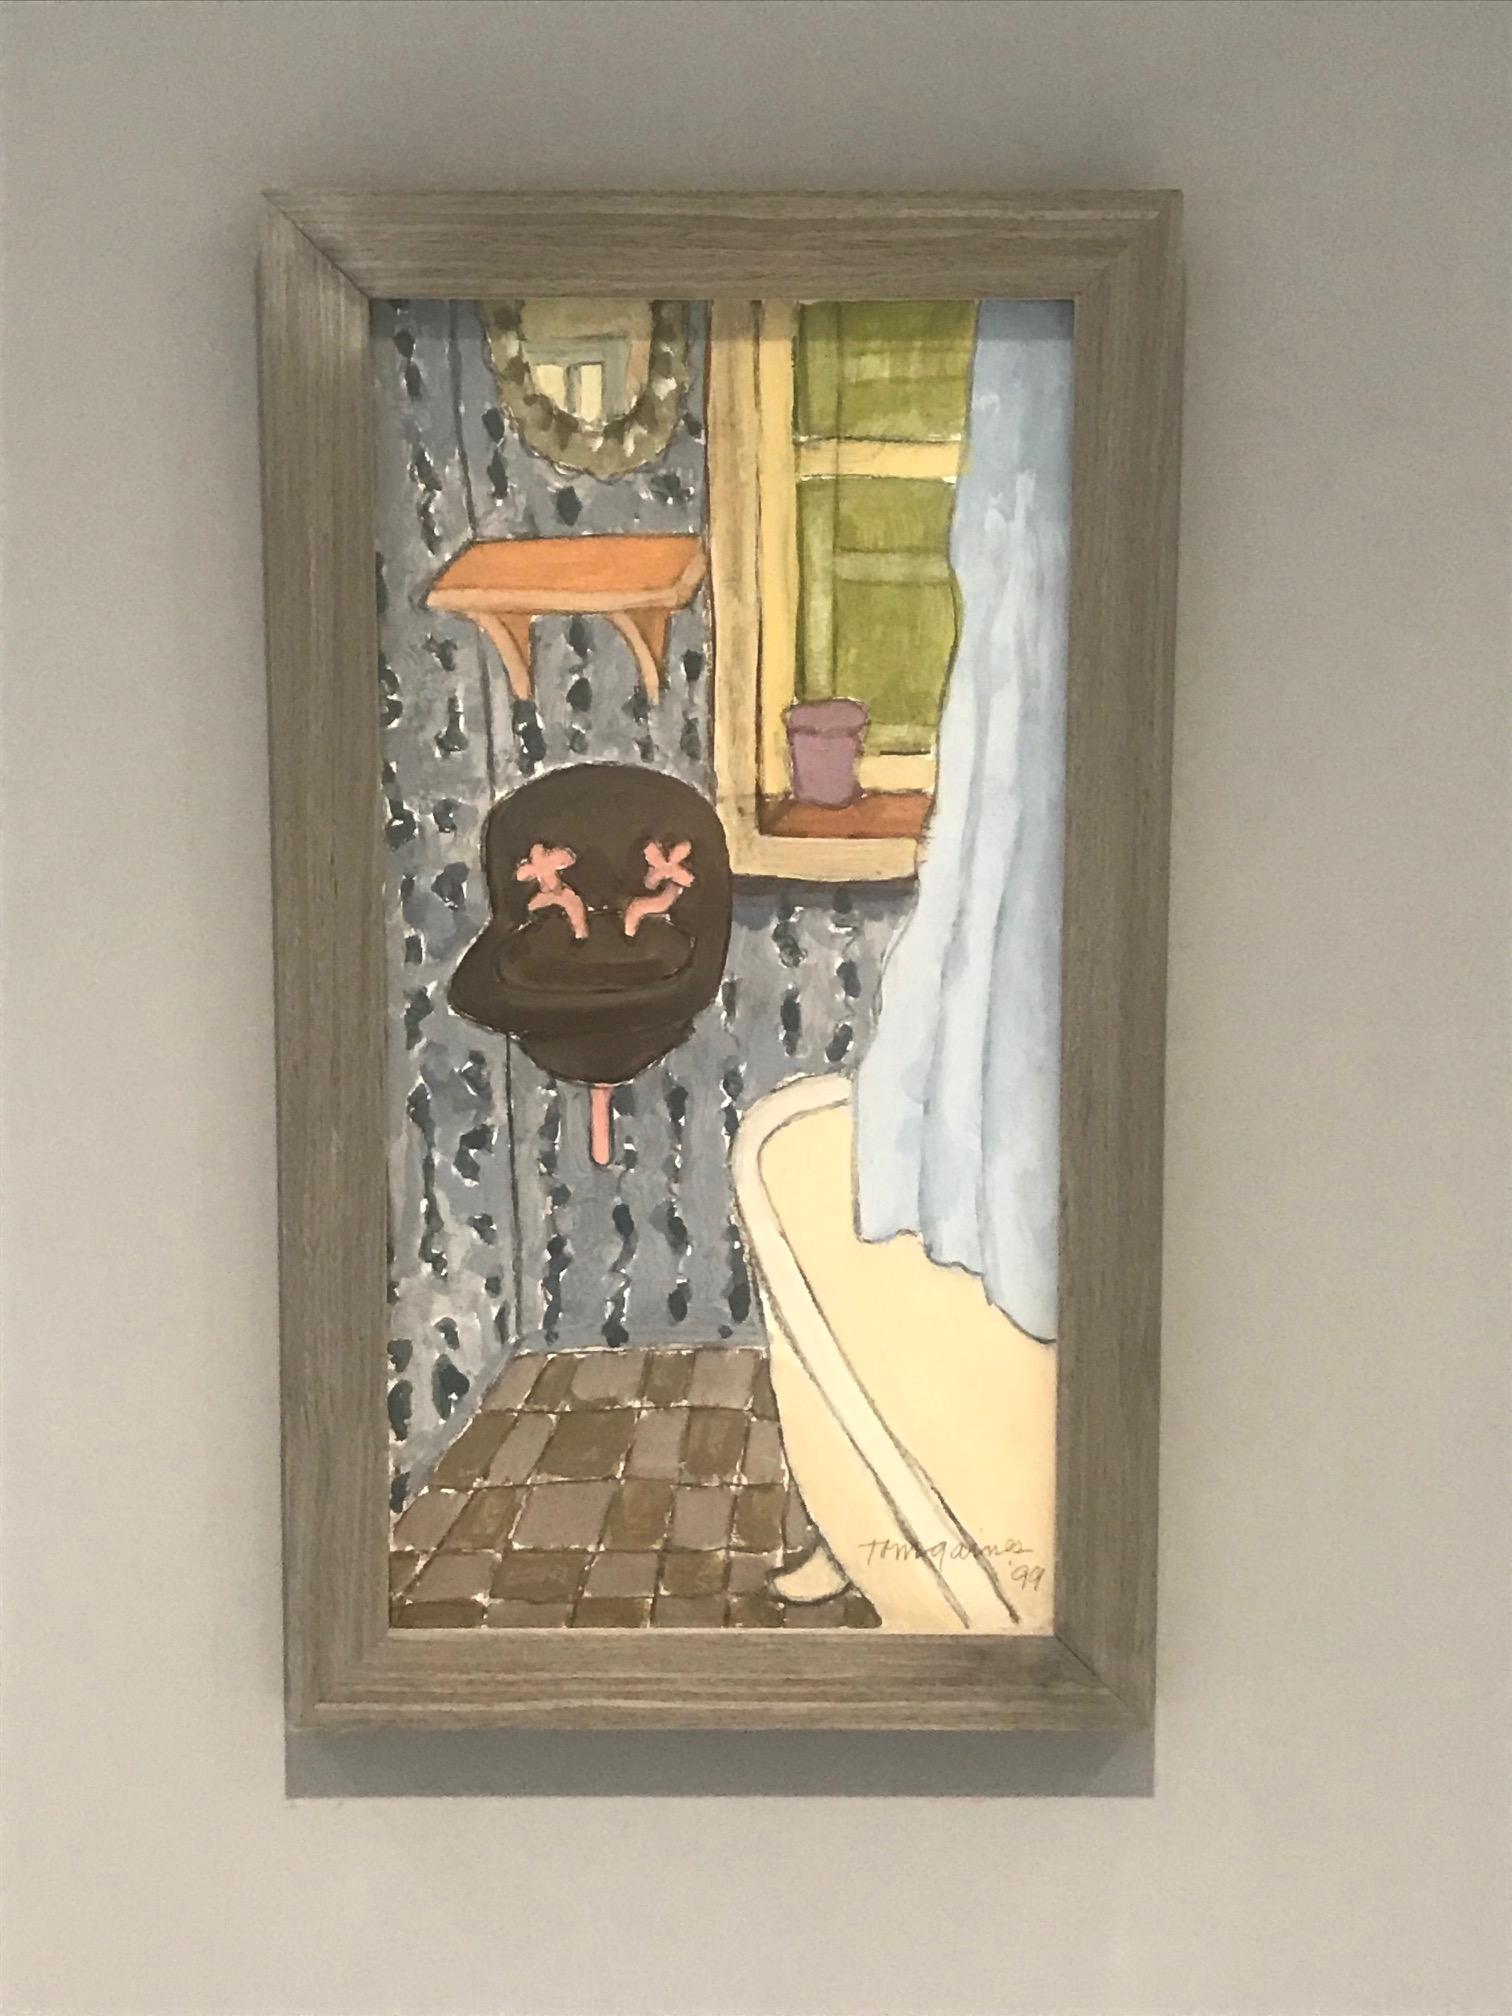 Exceptional representational painting featuring a quaint bathroom. Oil on canvas painting in custom grey cerused wood frame fitted with museum quality glass. The painting features figural forms depicting a charming washroom with tiled floor,